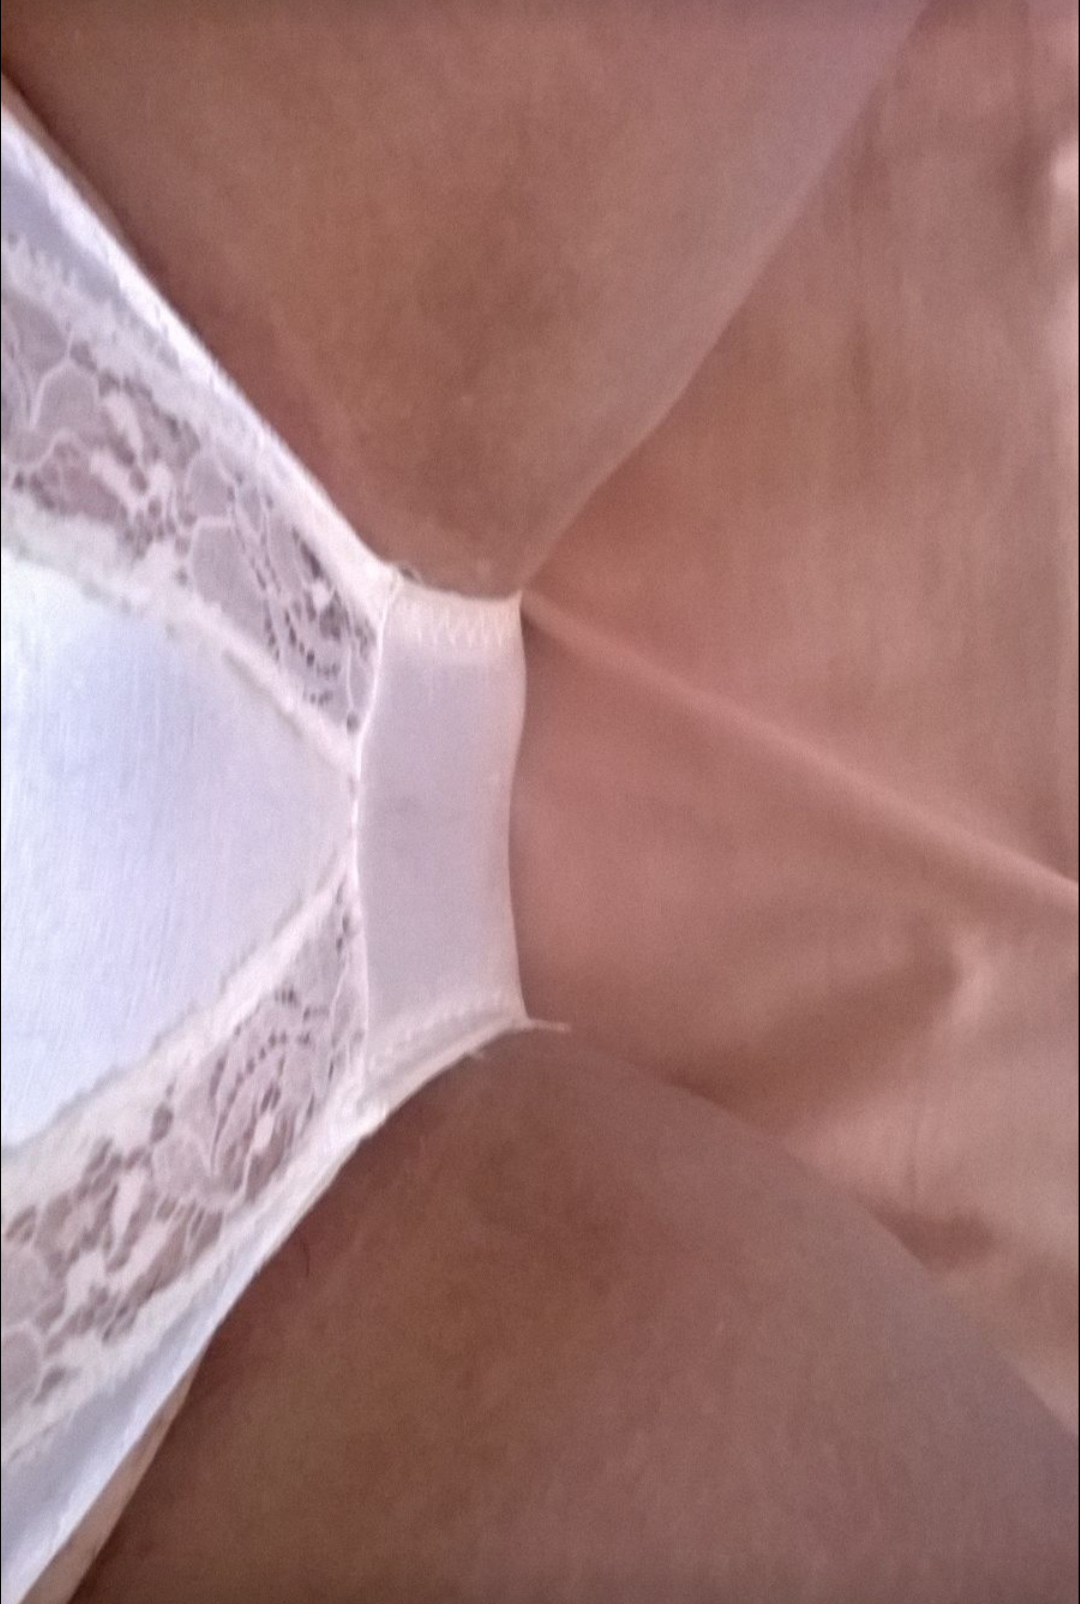 Want to take panty off